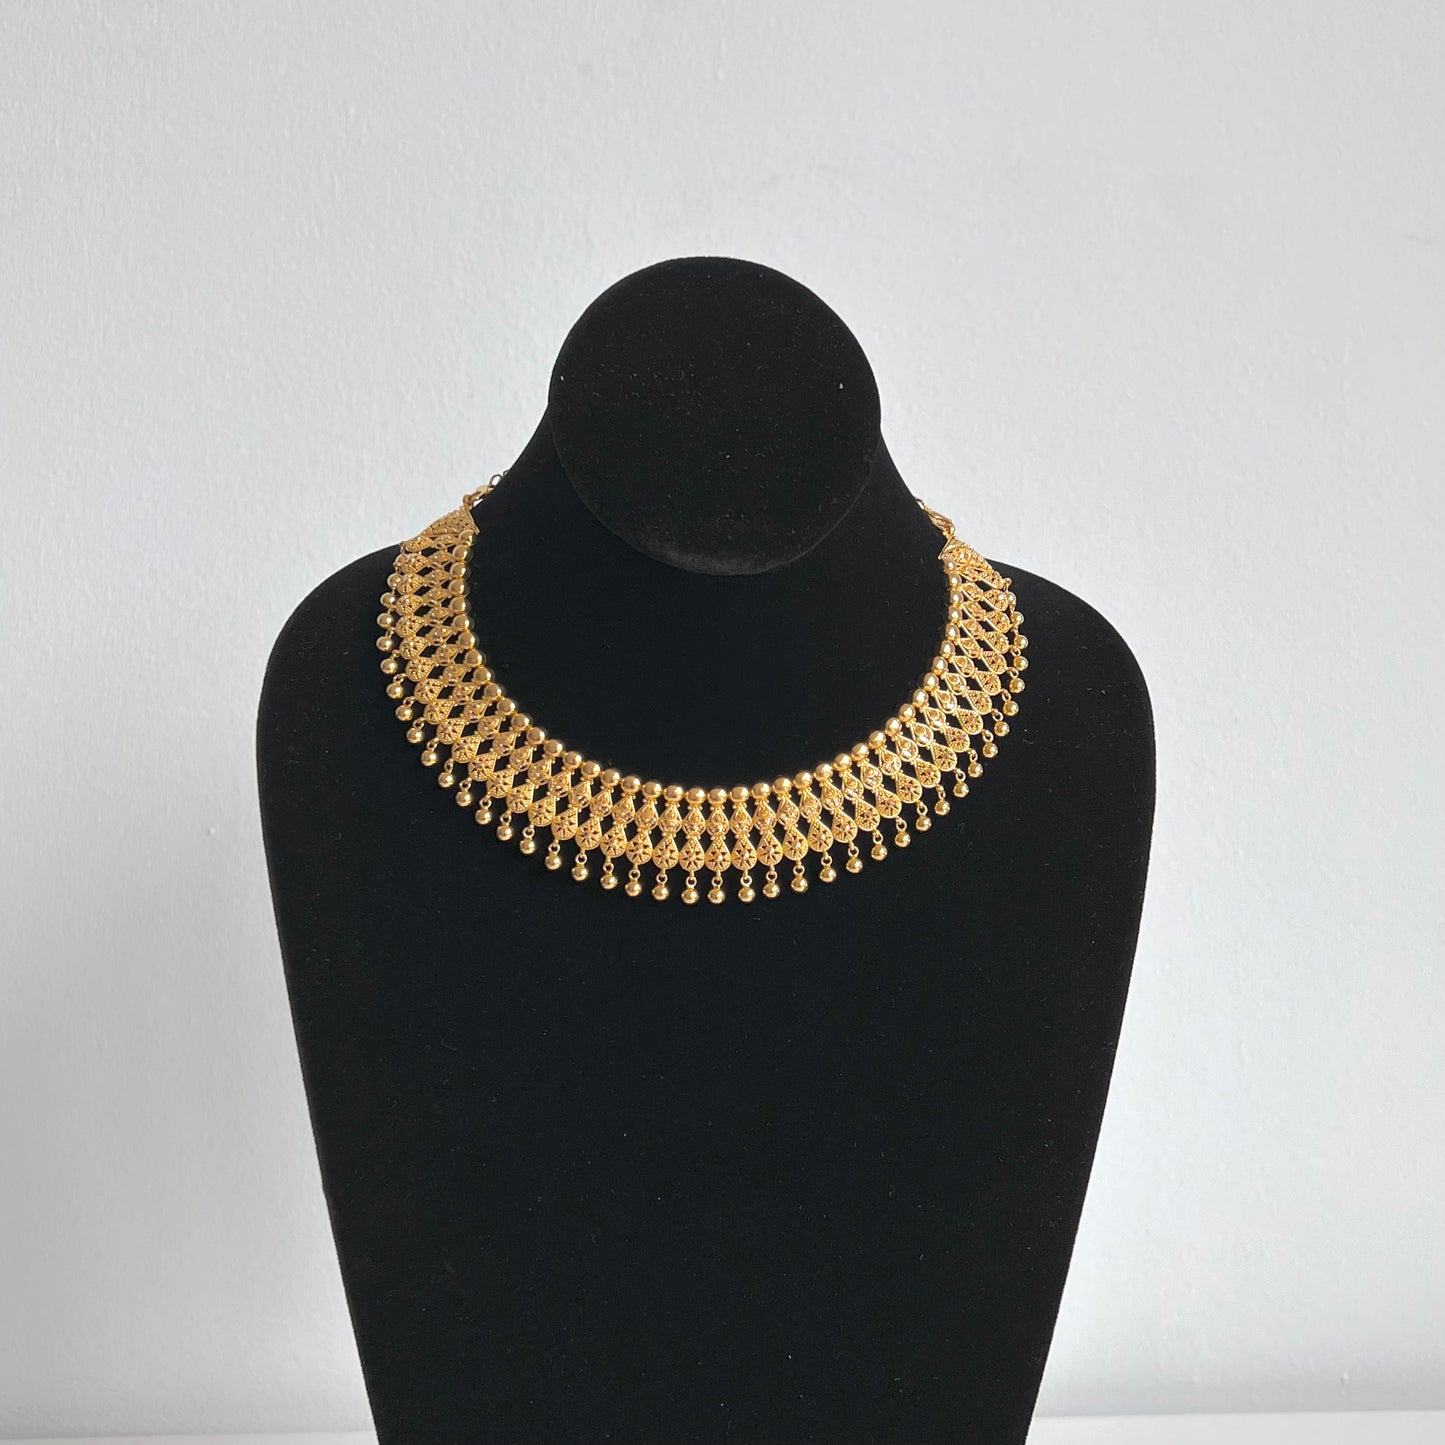 Splendid Choker Necklace with a Thick Design Featuring Several Golden Balls and a Pair of Royal Earrings